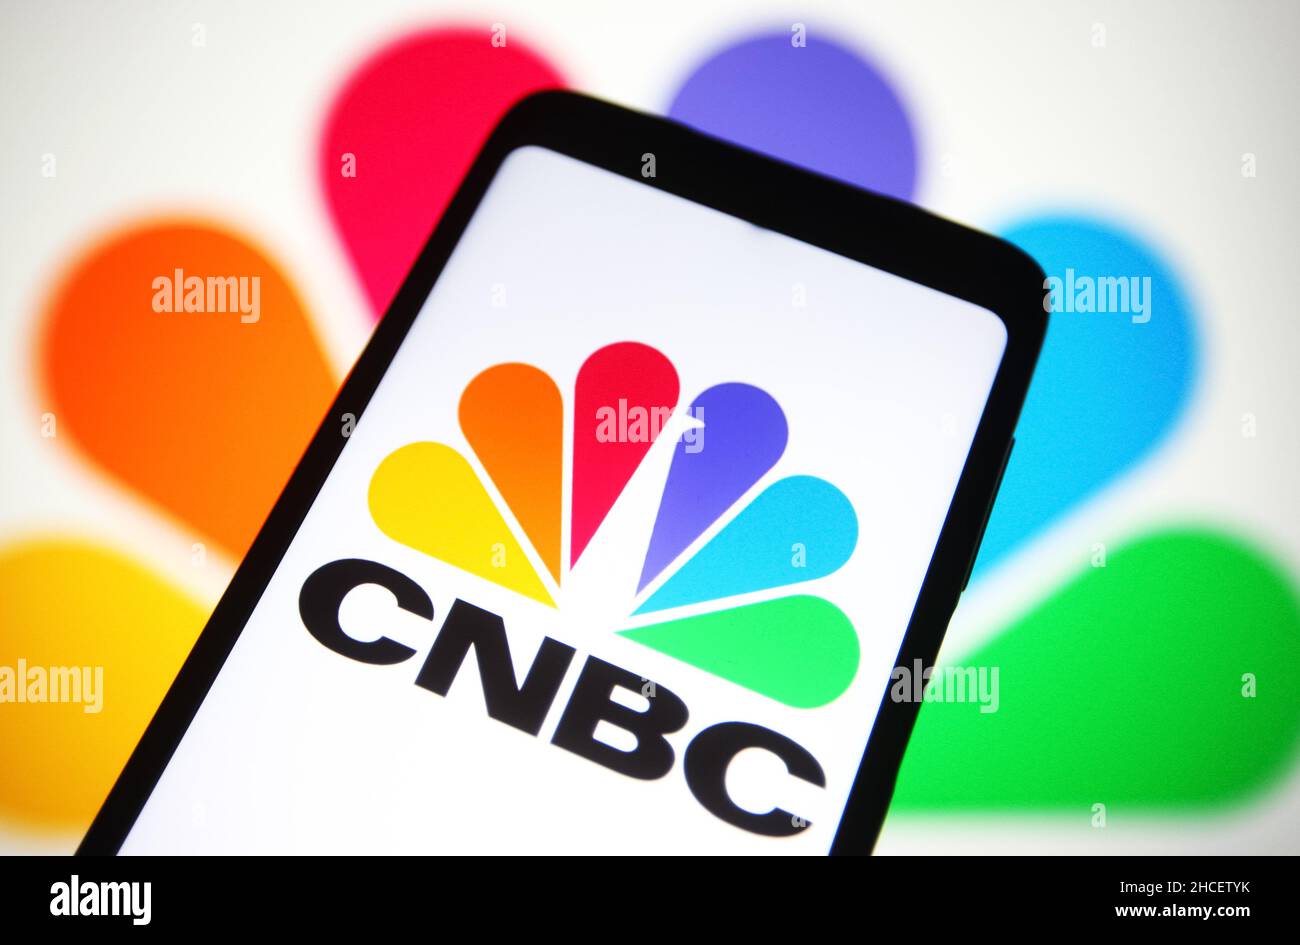 In this photo illustration, CNBC (Consumer News and Business Channel) logo is seen on a smartphone screen. Stock Photo